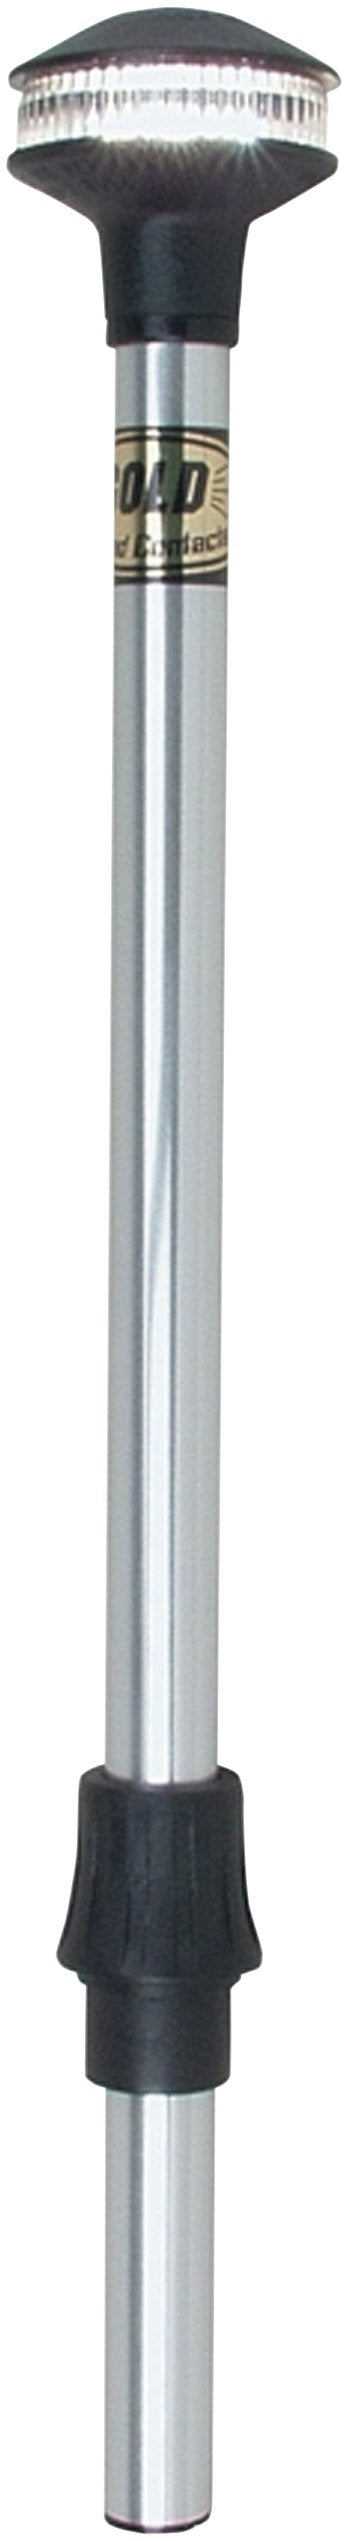 Perko All-Round Light Pole Only Reduced Glare 24" 1440-DP2-CHR | 24